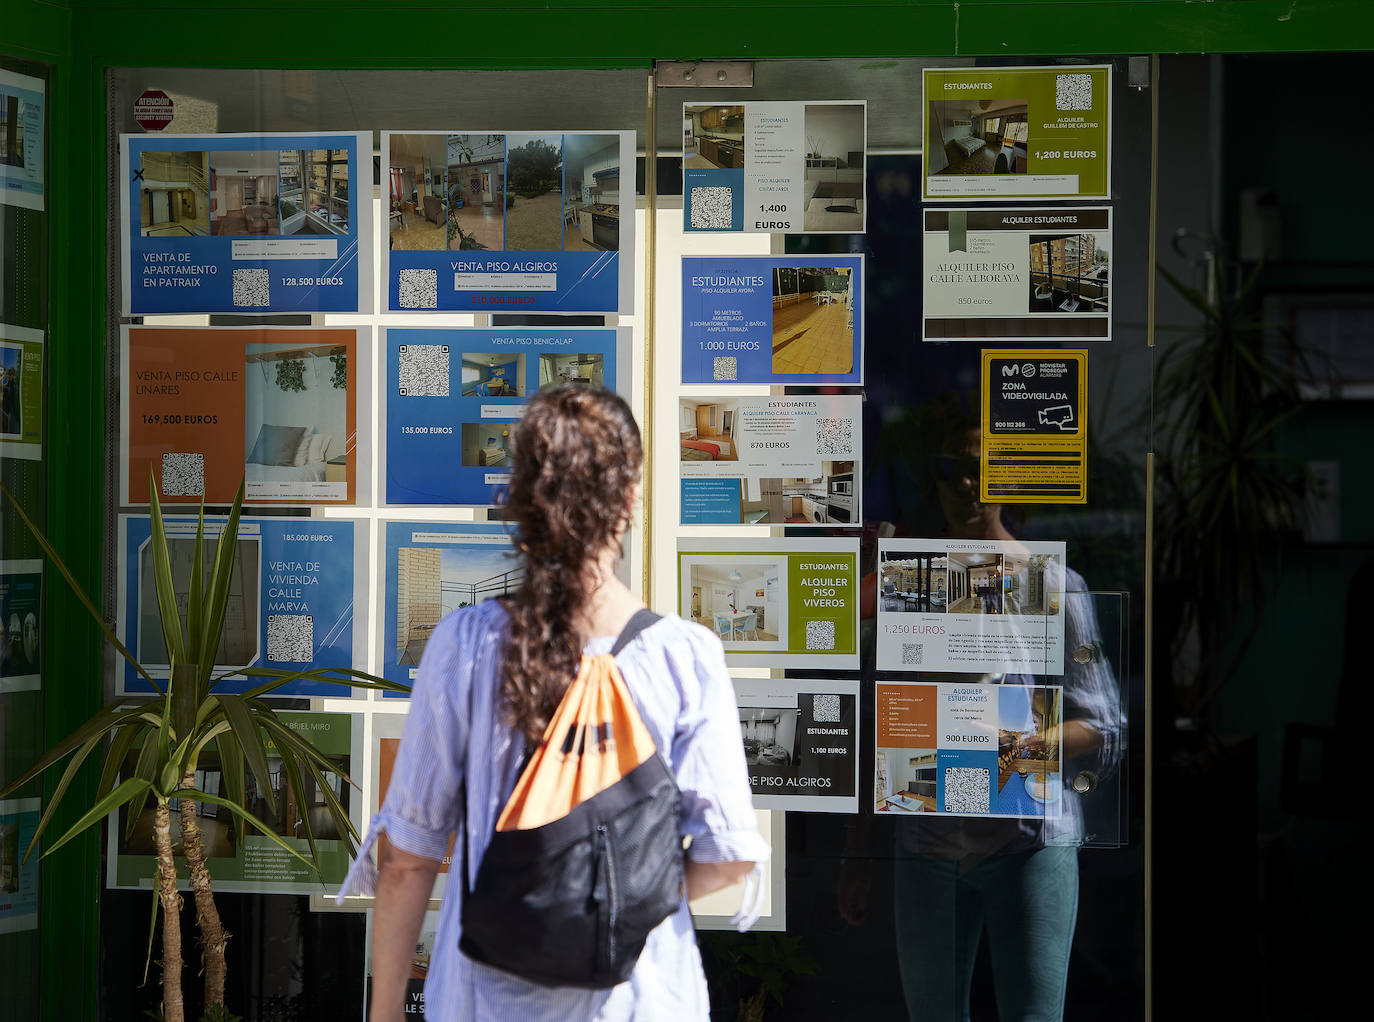 A young woman looks at the window of a real estate agency, in a file photo.